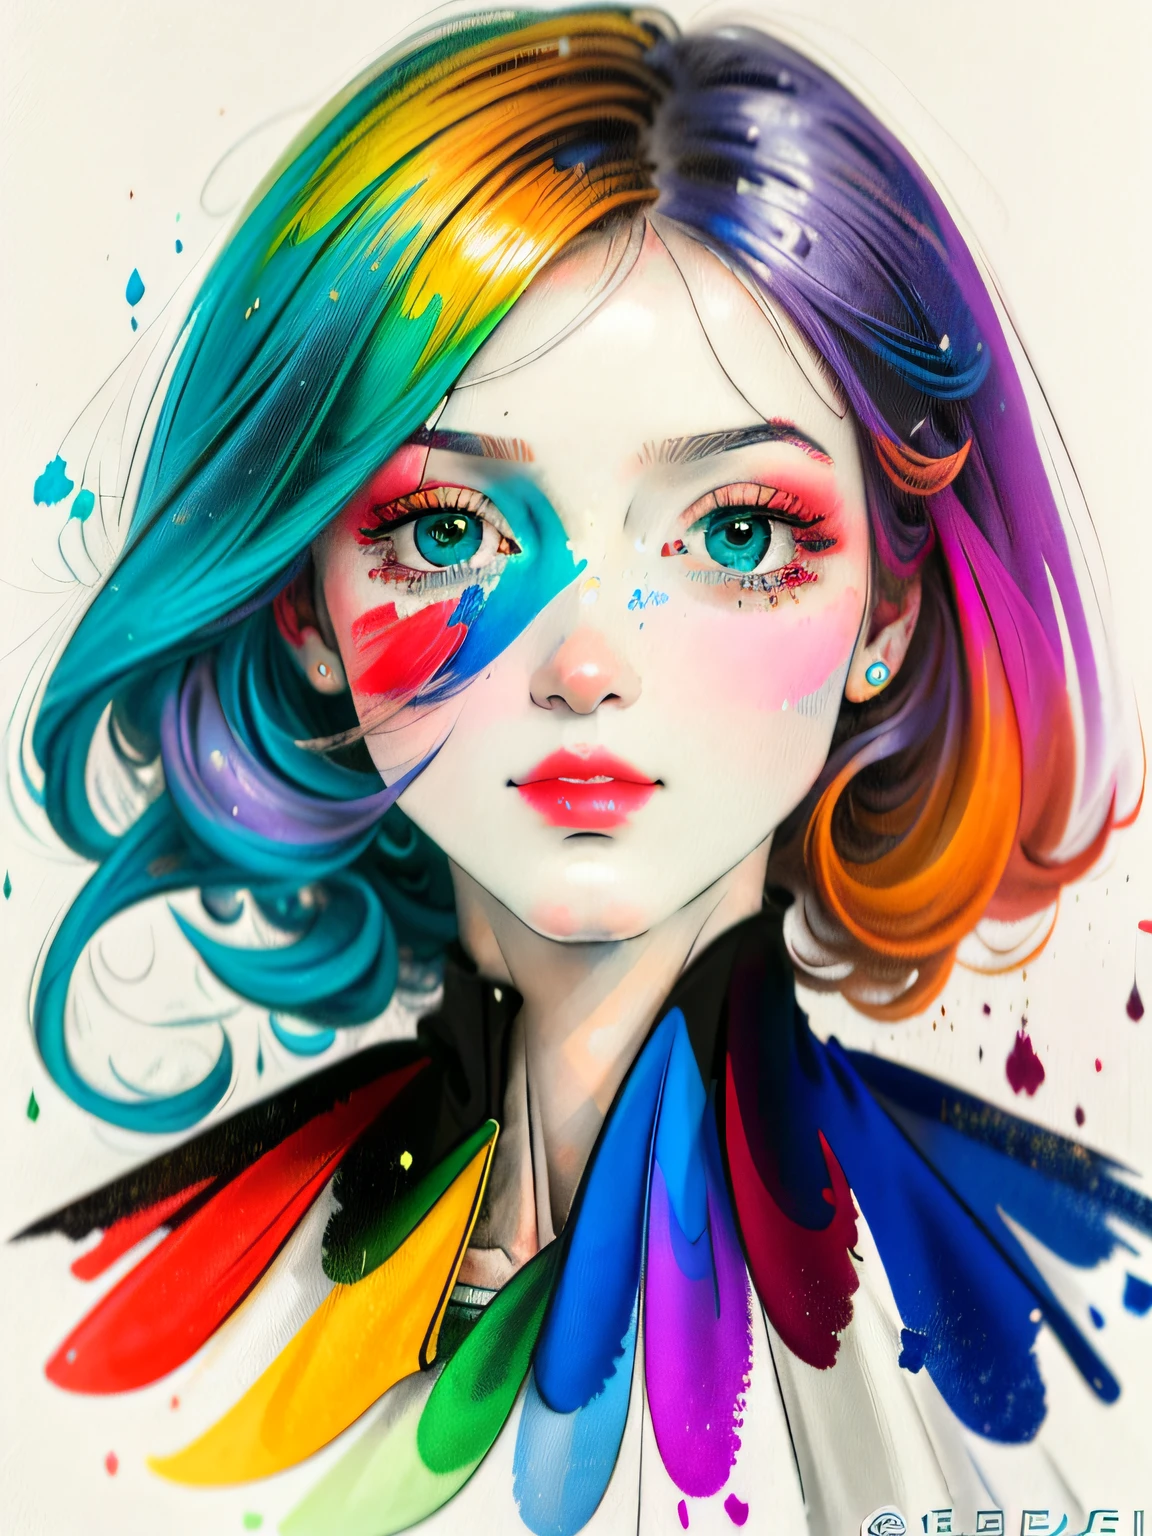 awardwinning,most impressive,((a portrait painting of 1 woman with a colorful dress and hair)), beautiful digital art, (Alberto Seveso style),Best composition,harmony,((Beautiful  eyes)),extremely detaild,centred,textured fabric,(((a face)))